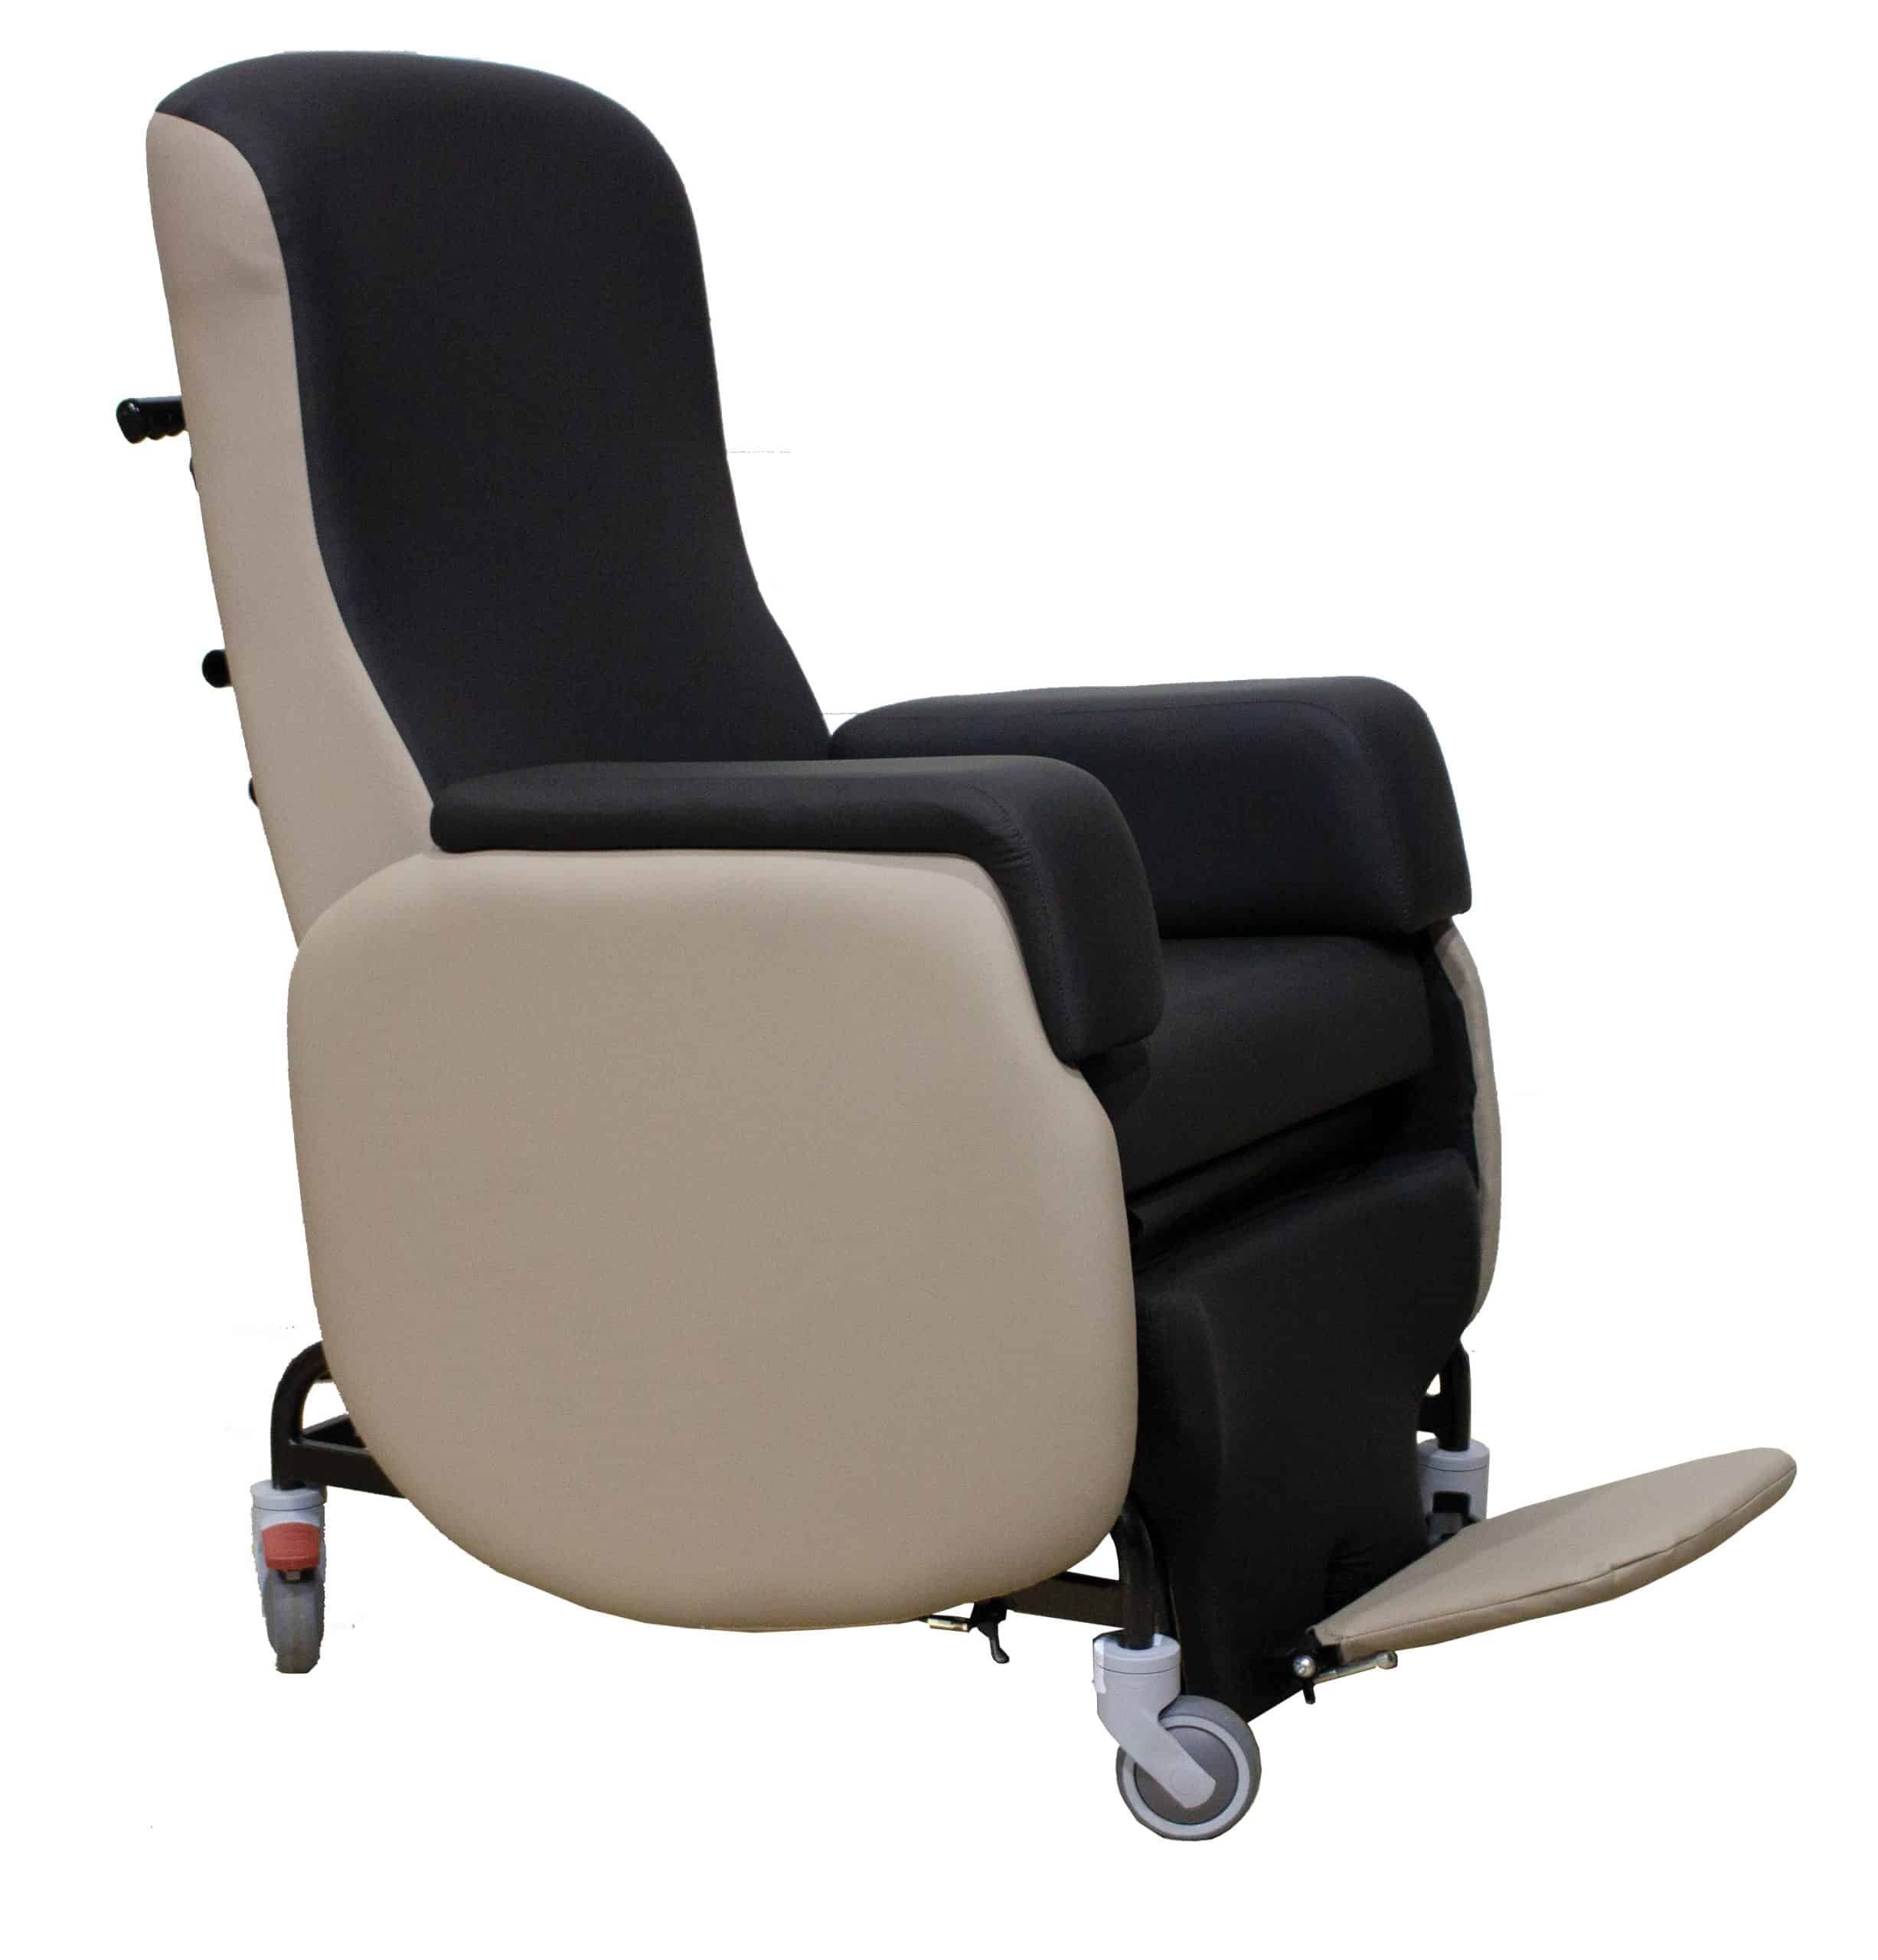 Allier Highly Mobile & Flexible Care Chair